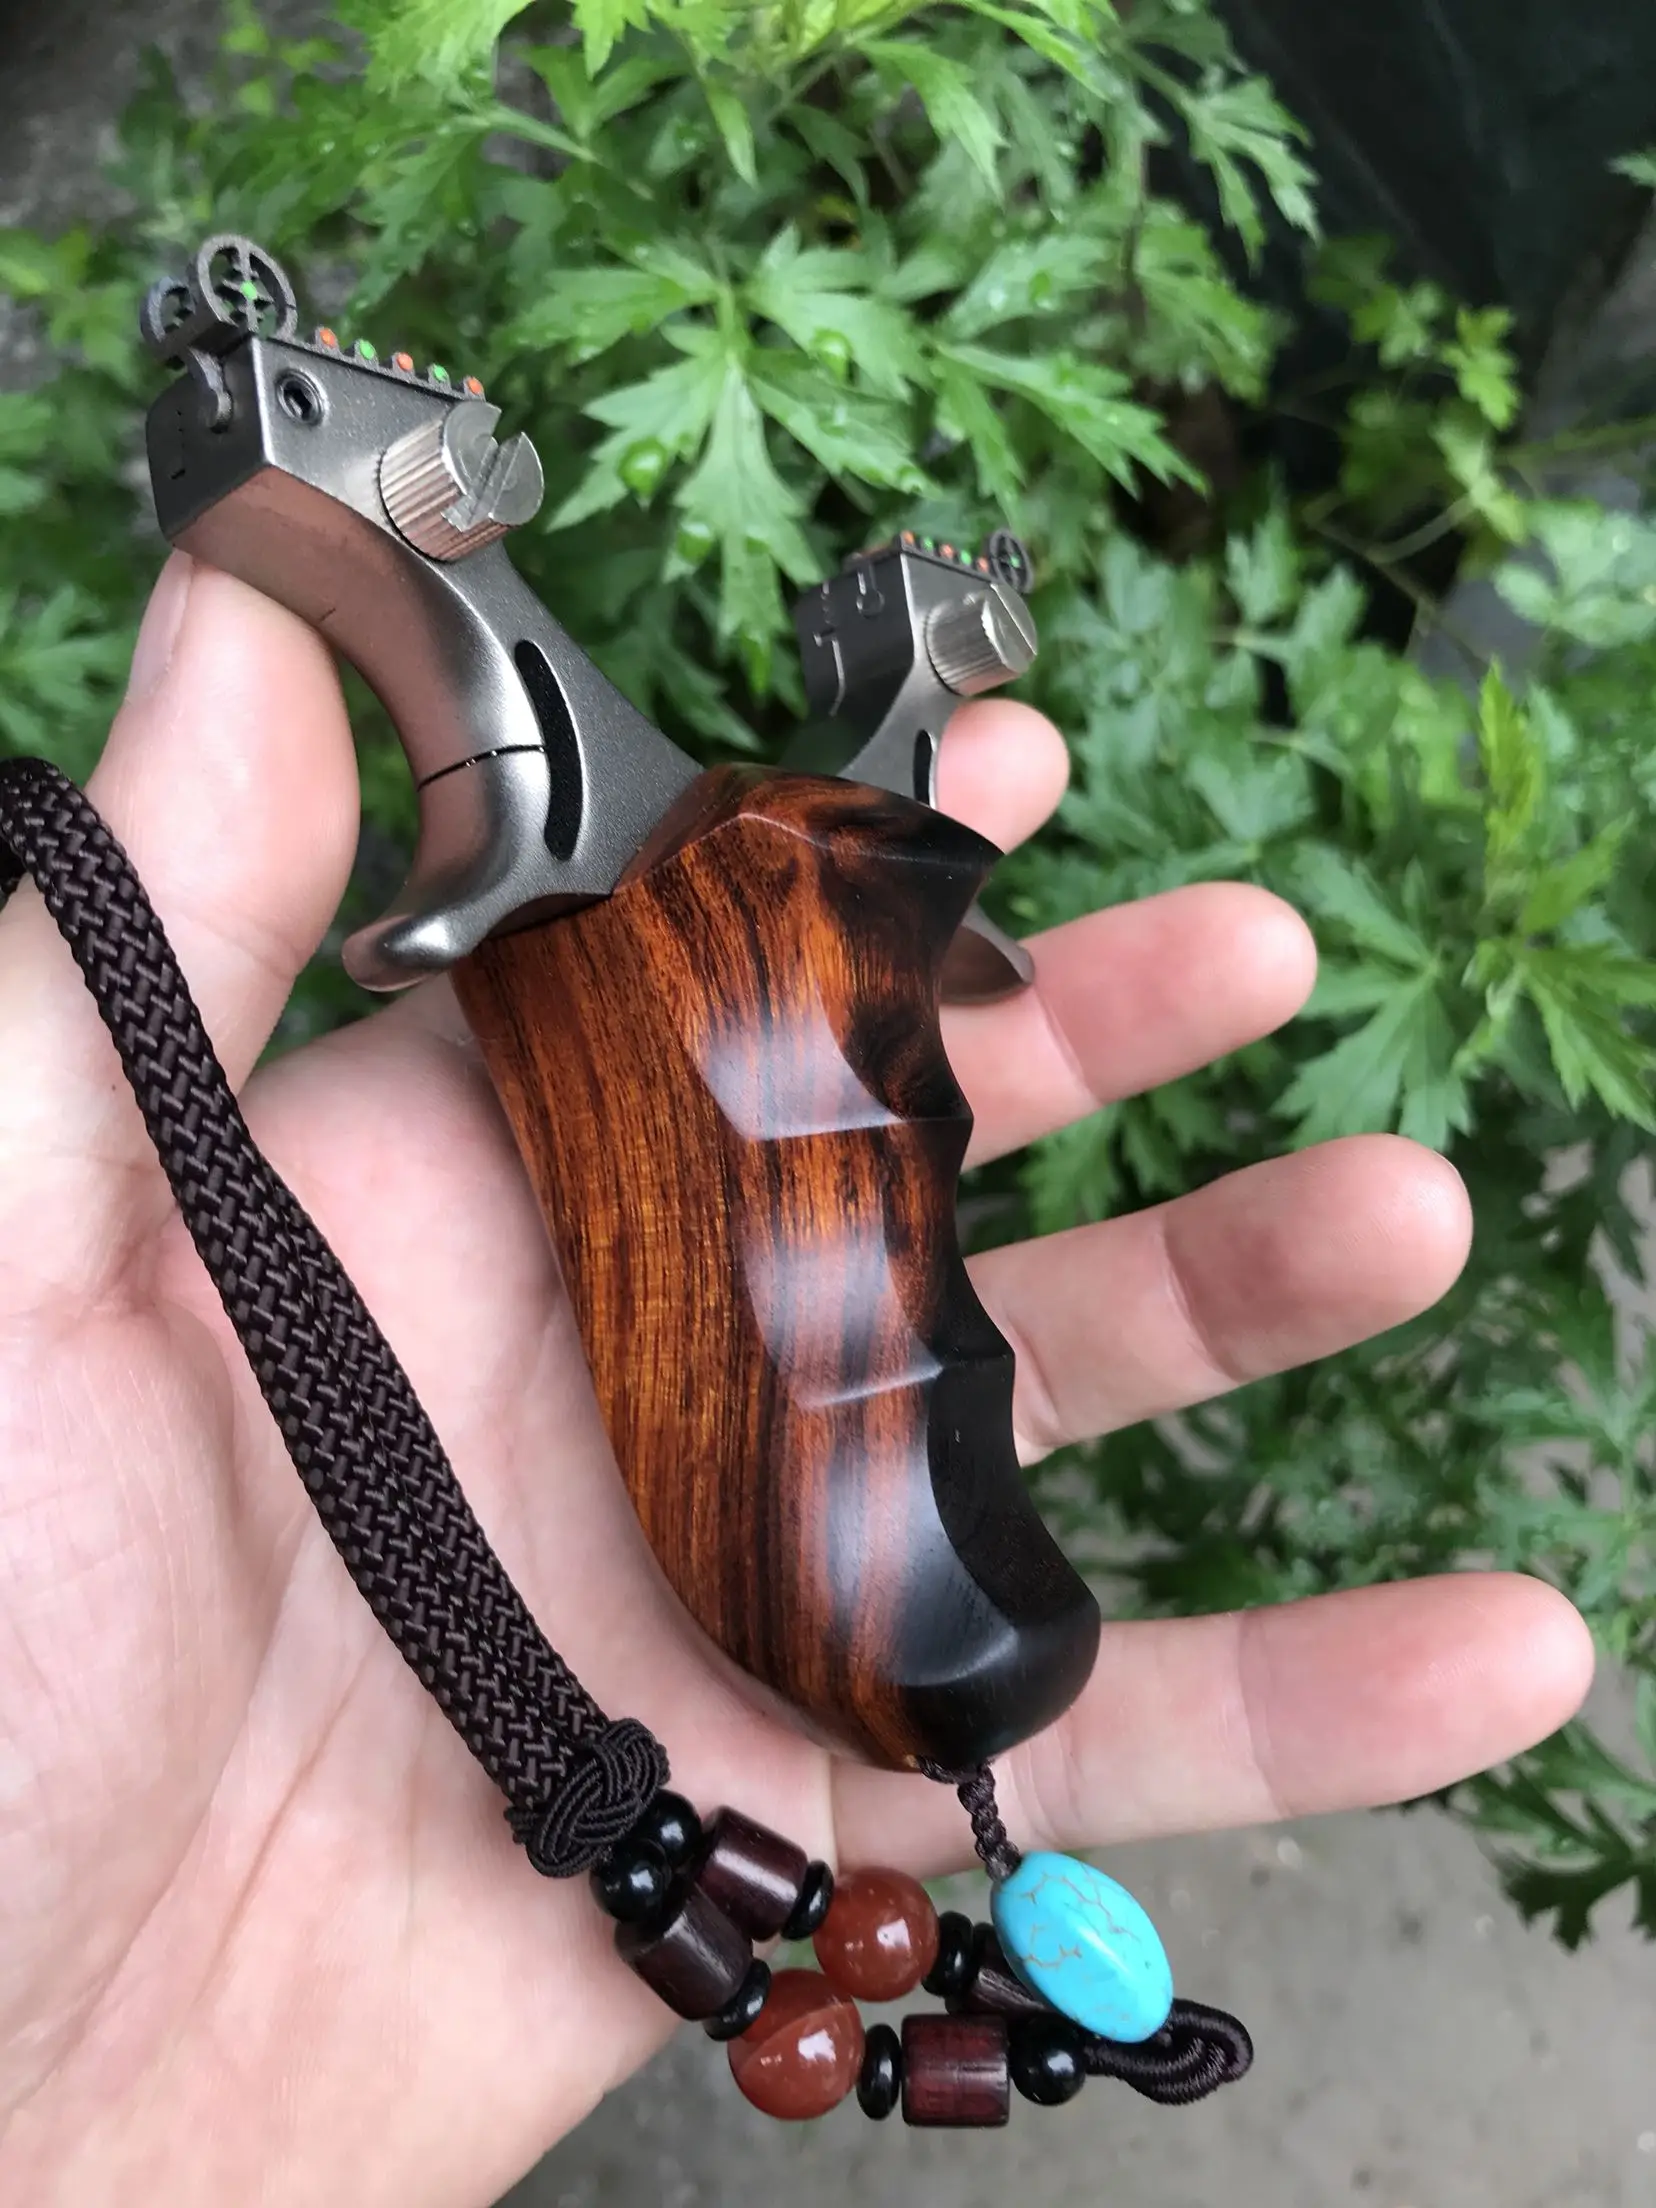 

Precise TC21 Titanium Alloy +wood Slingshot Catapult Outdoor Hunting Shooting Sling shot with Powerful Flat Rubber Band